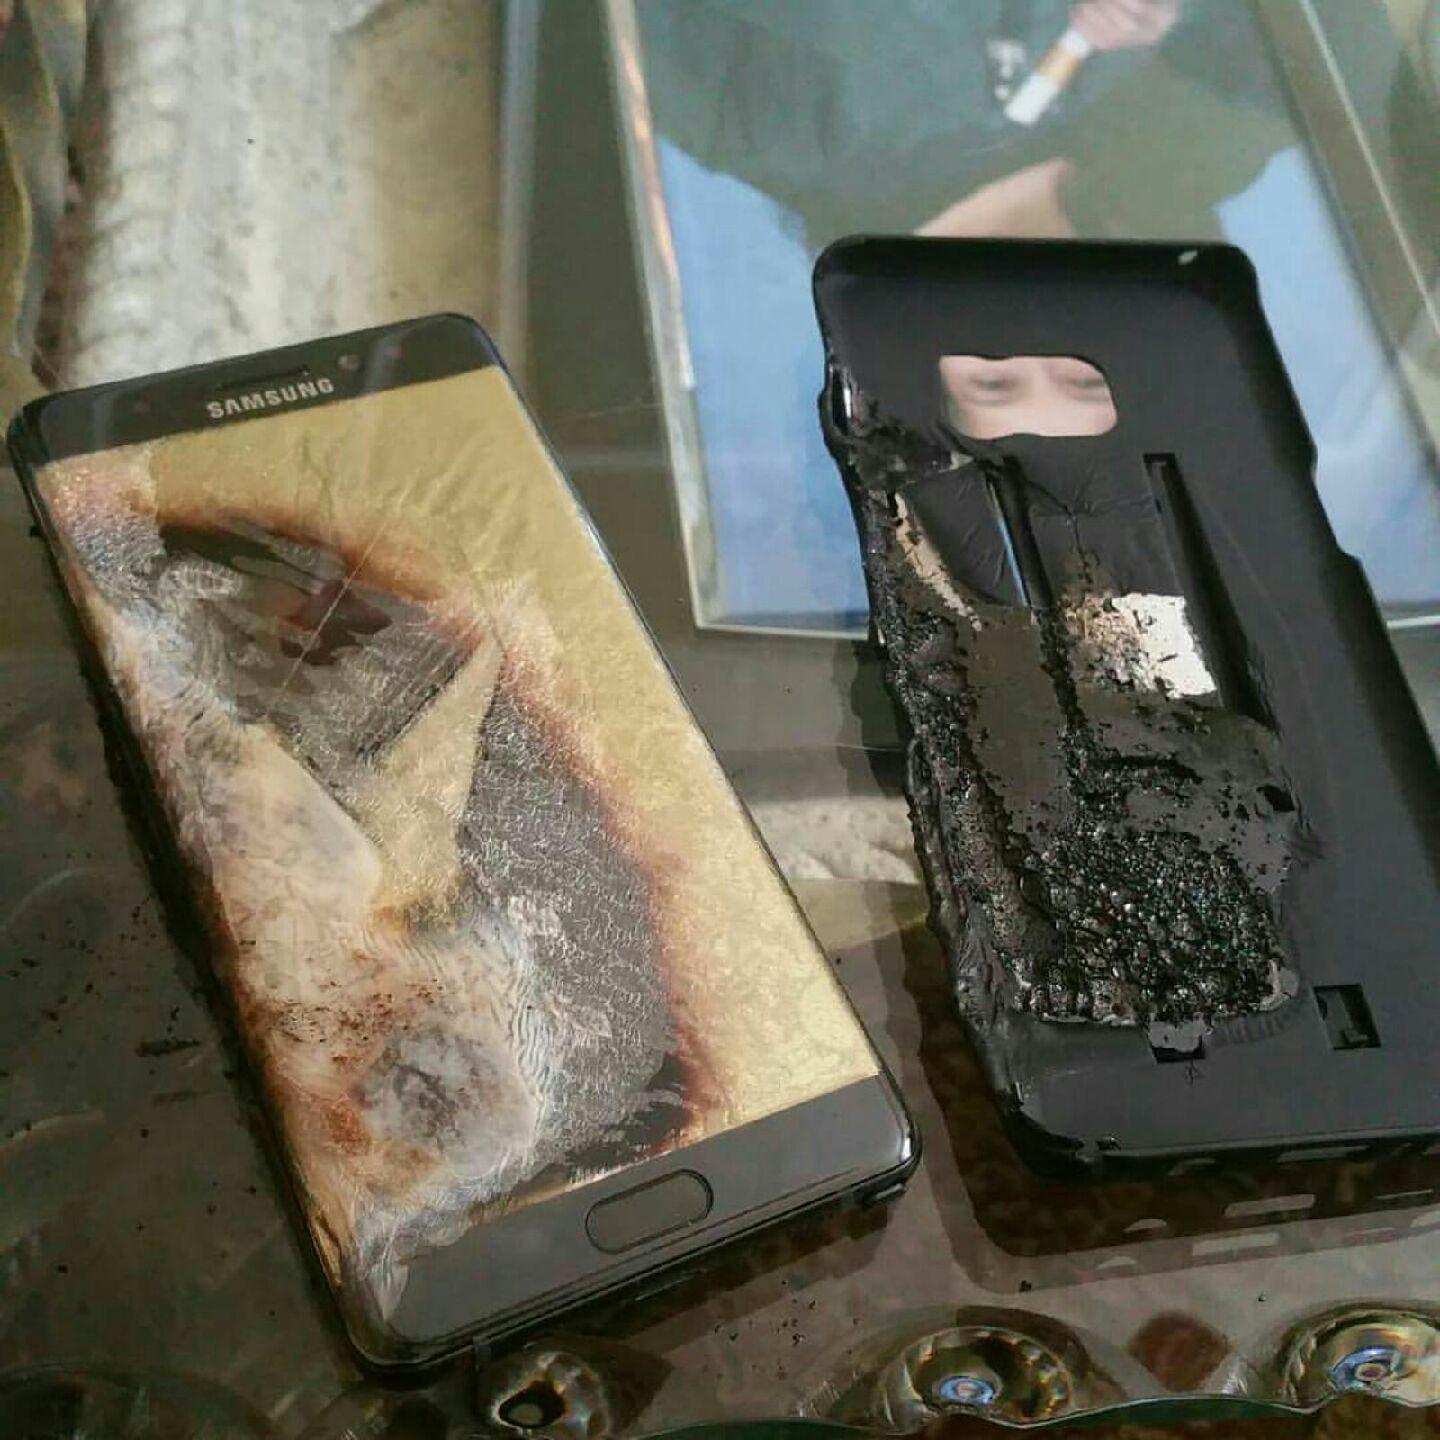 Samsung Galaxy Note7 exploded